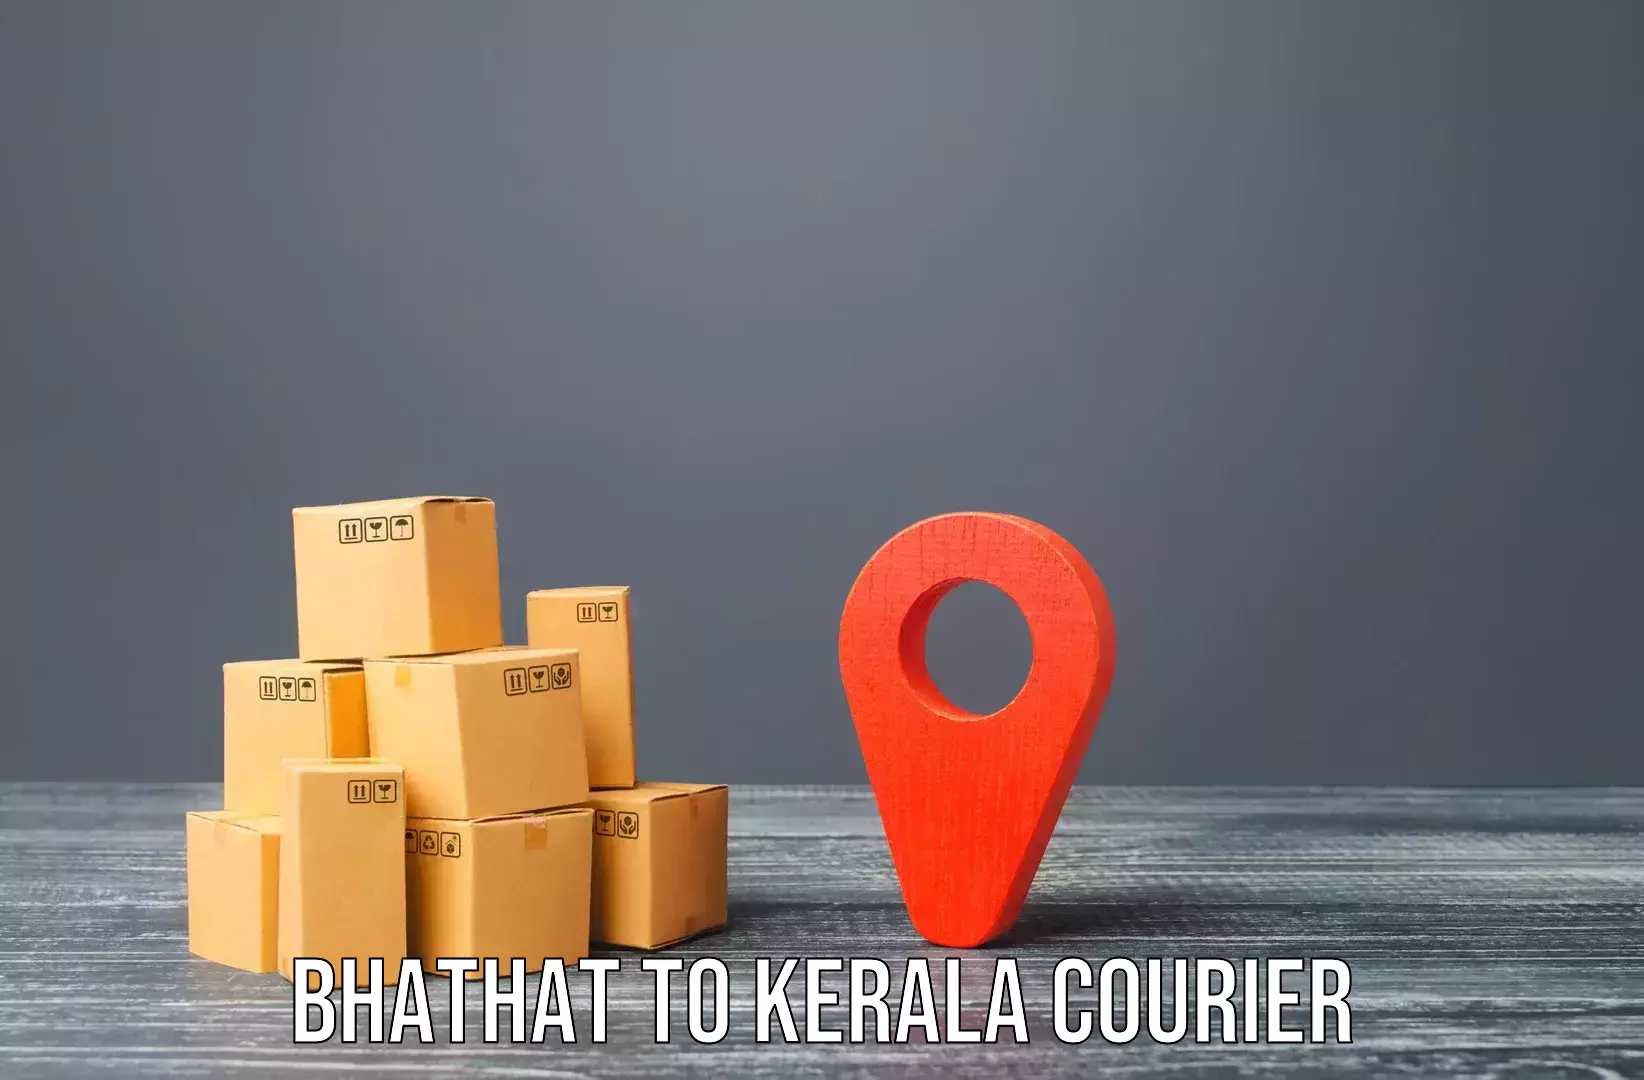 Professional moving assistance Bhathat to Cochin University of Science and Technology